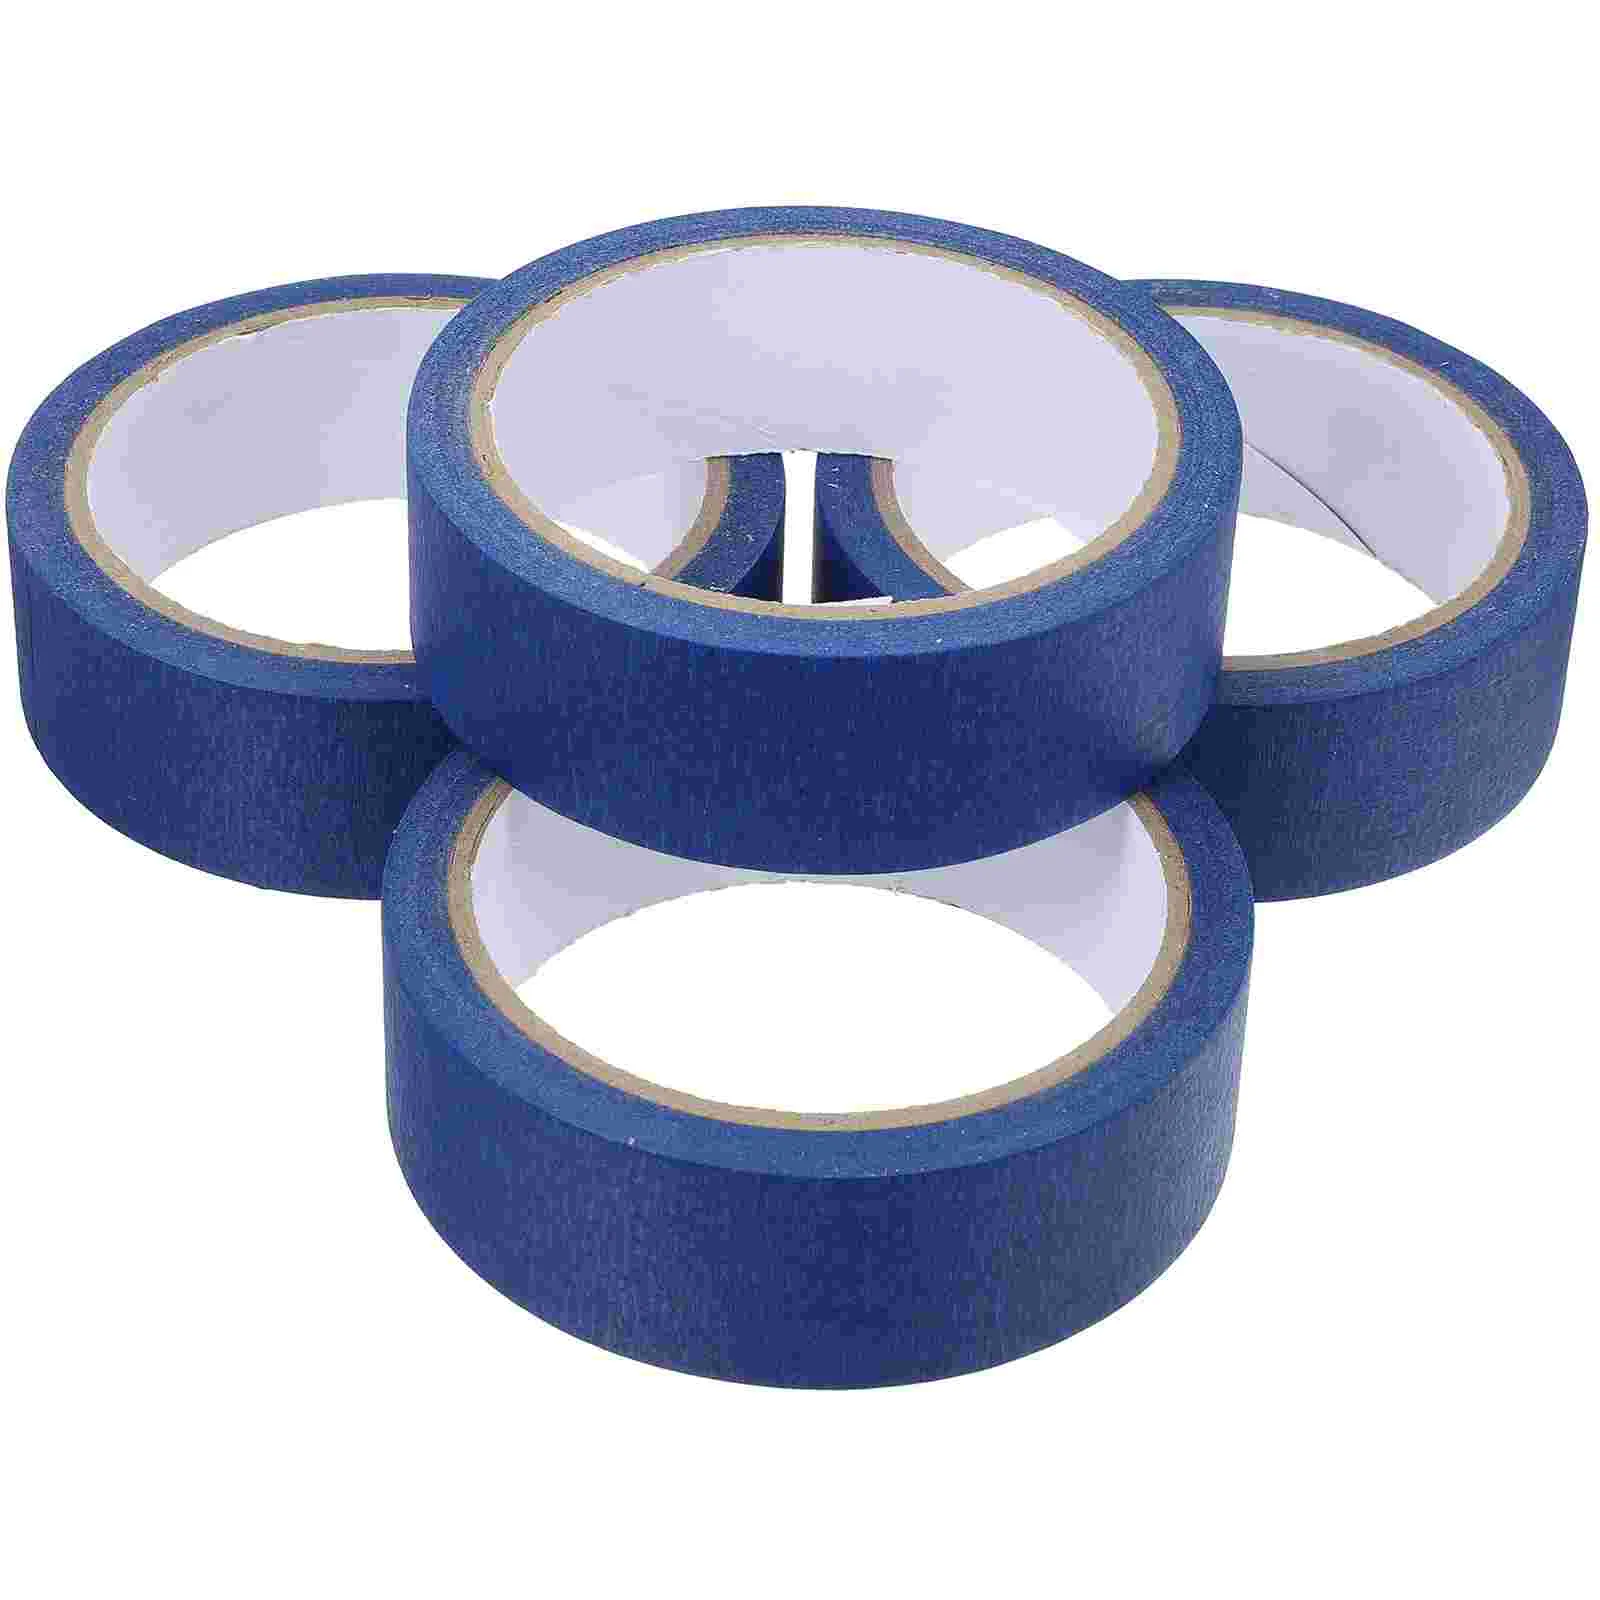 Blue Masking Tape DIY Tapes Crafts Adhesive Paint for Painting Painter Duct colorful dots washi tape japanese paper diy planner masking tape adhesive tapes stickers decorative stationery tapes